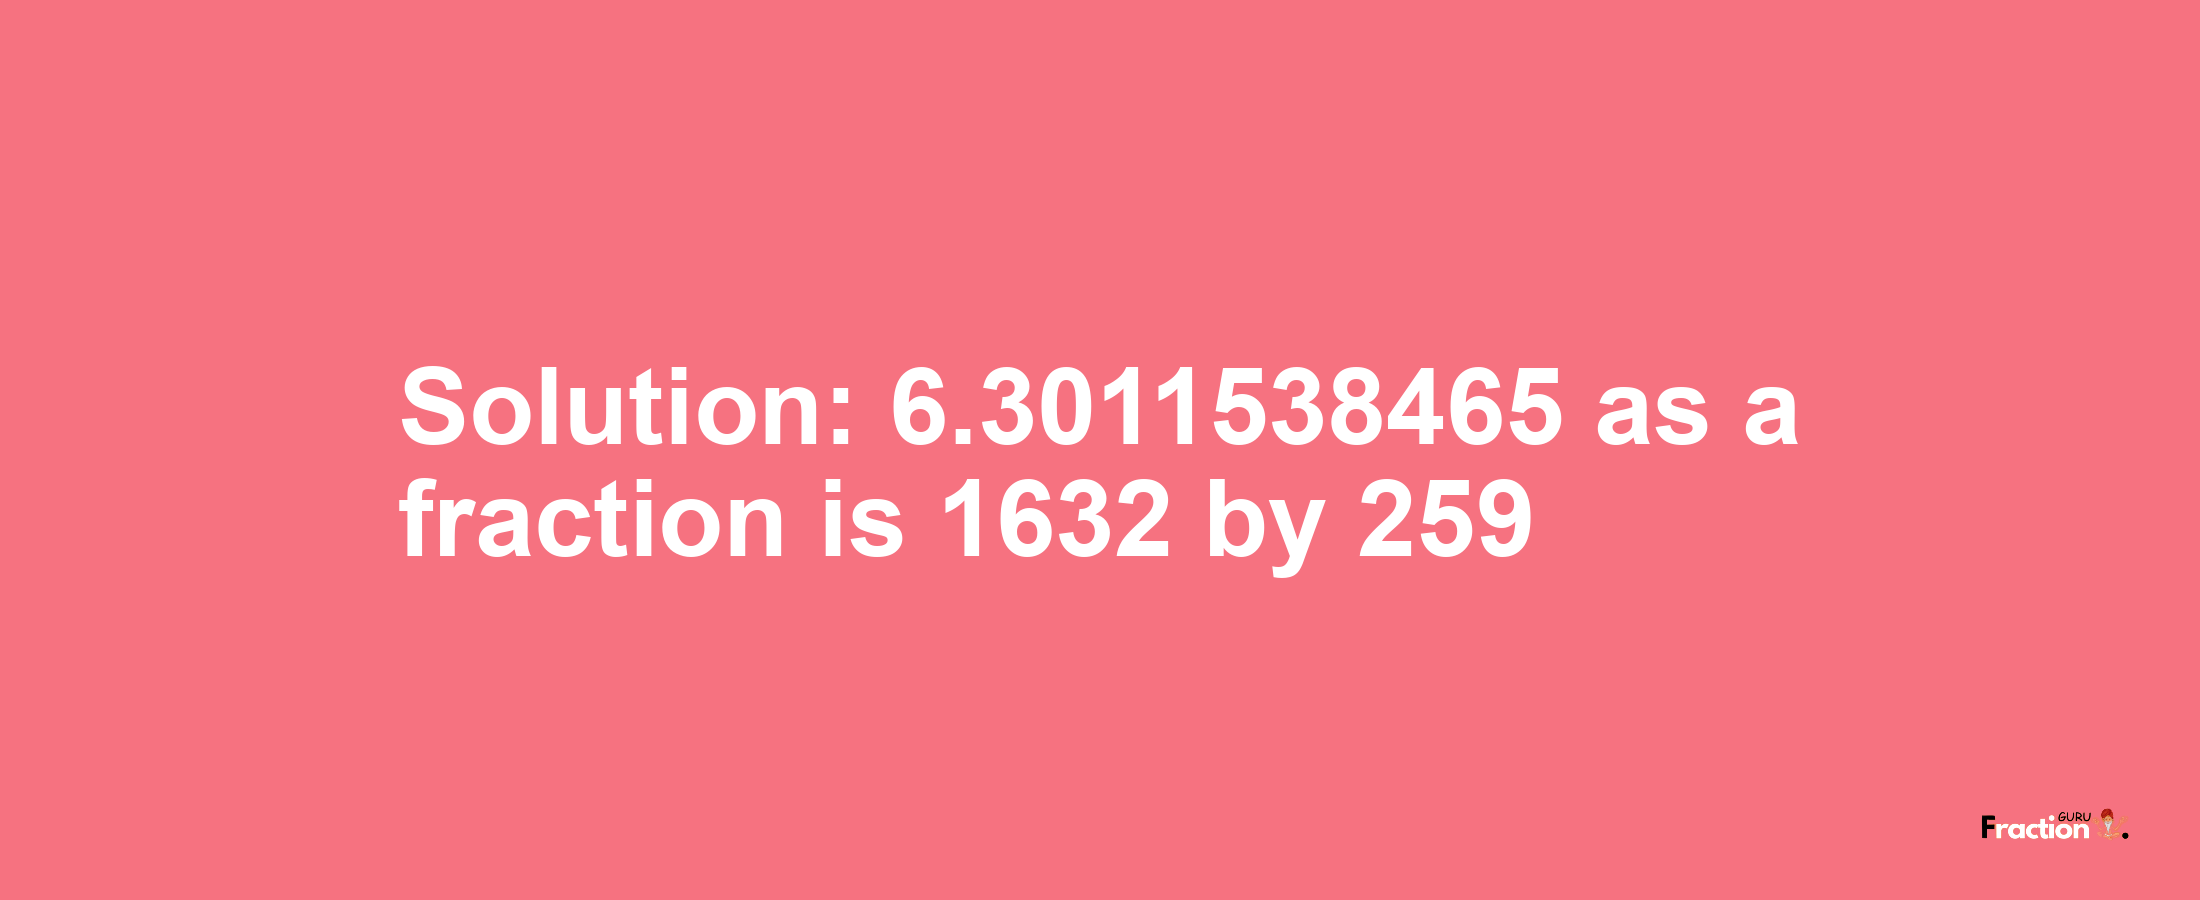 Solution:6.3011538465 as a fraction is 1632/259